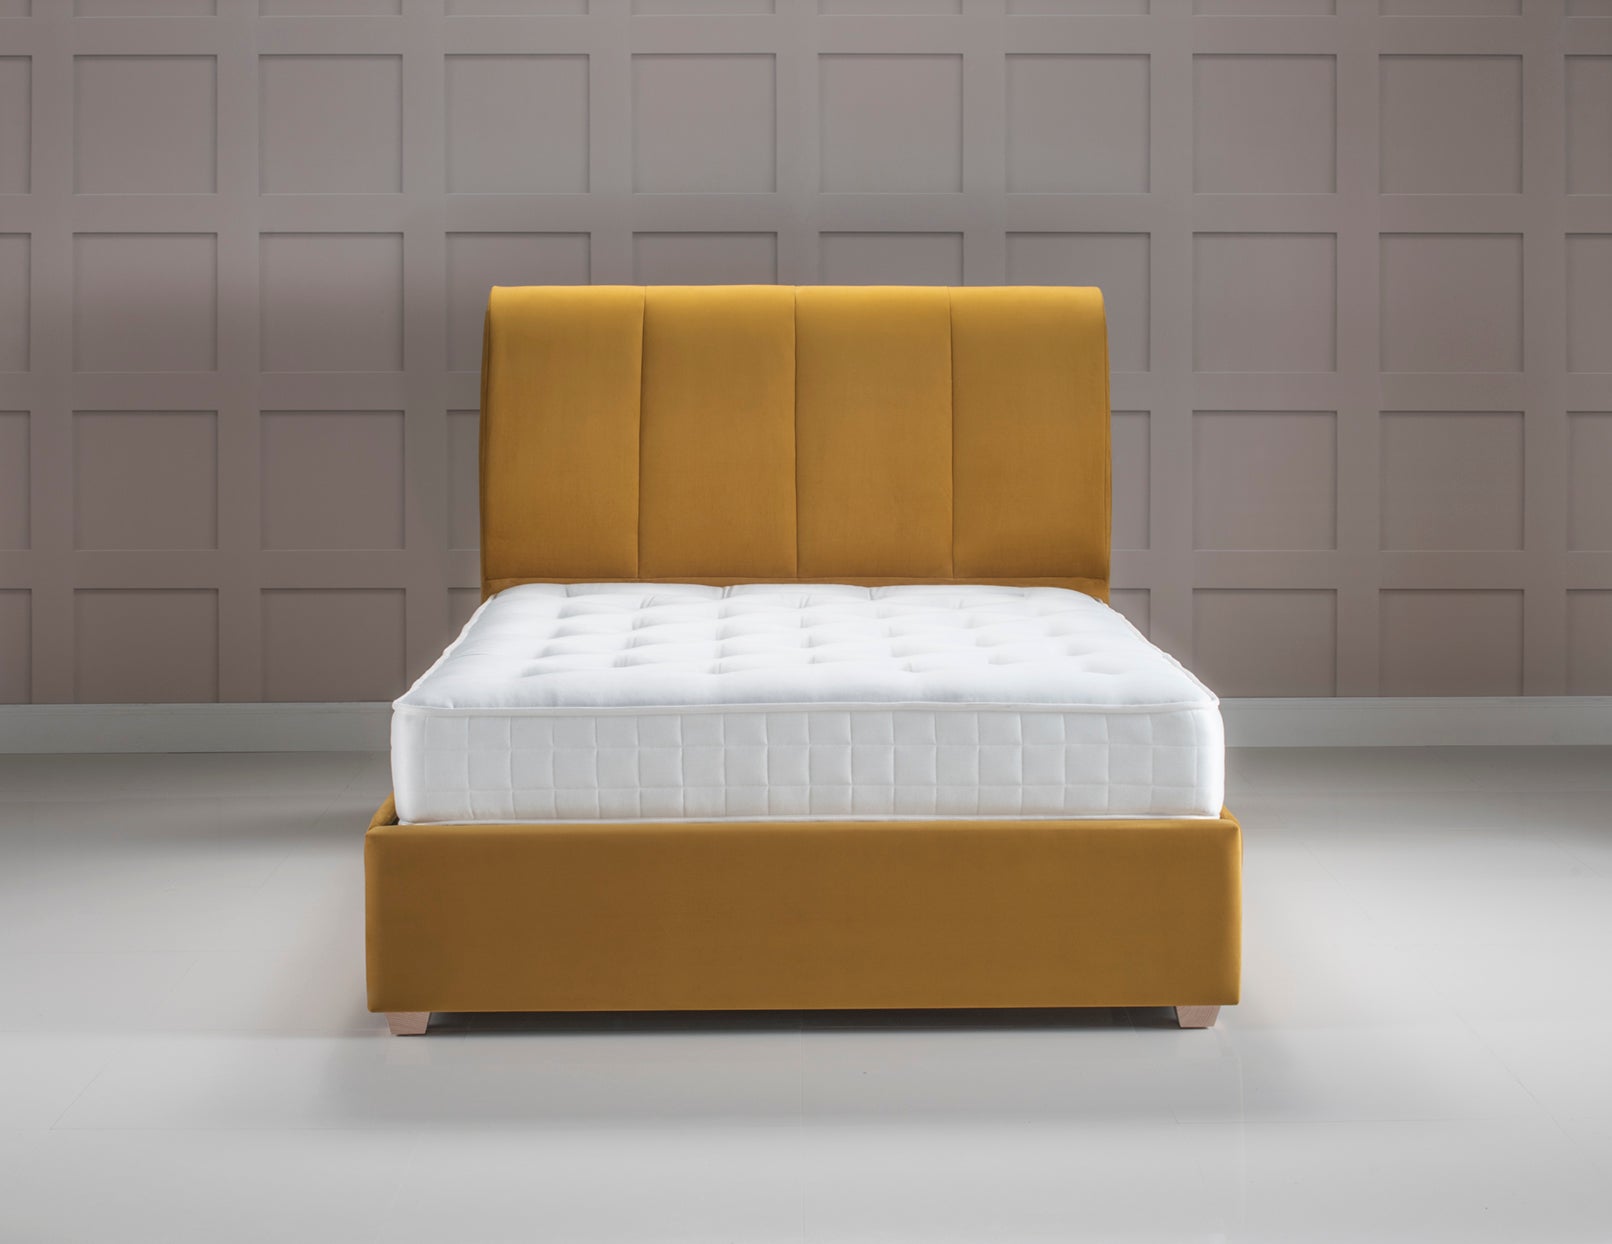 The Charnwood Upholstered Bed